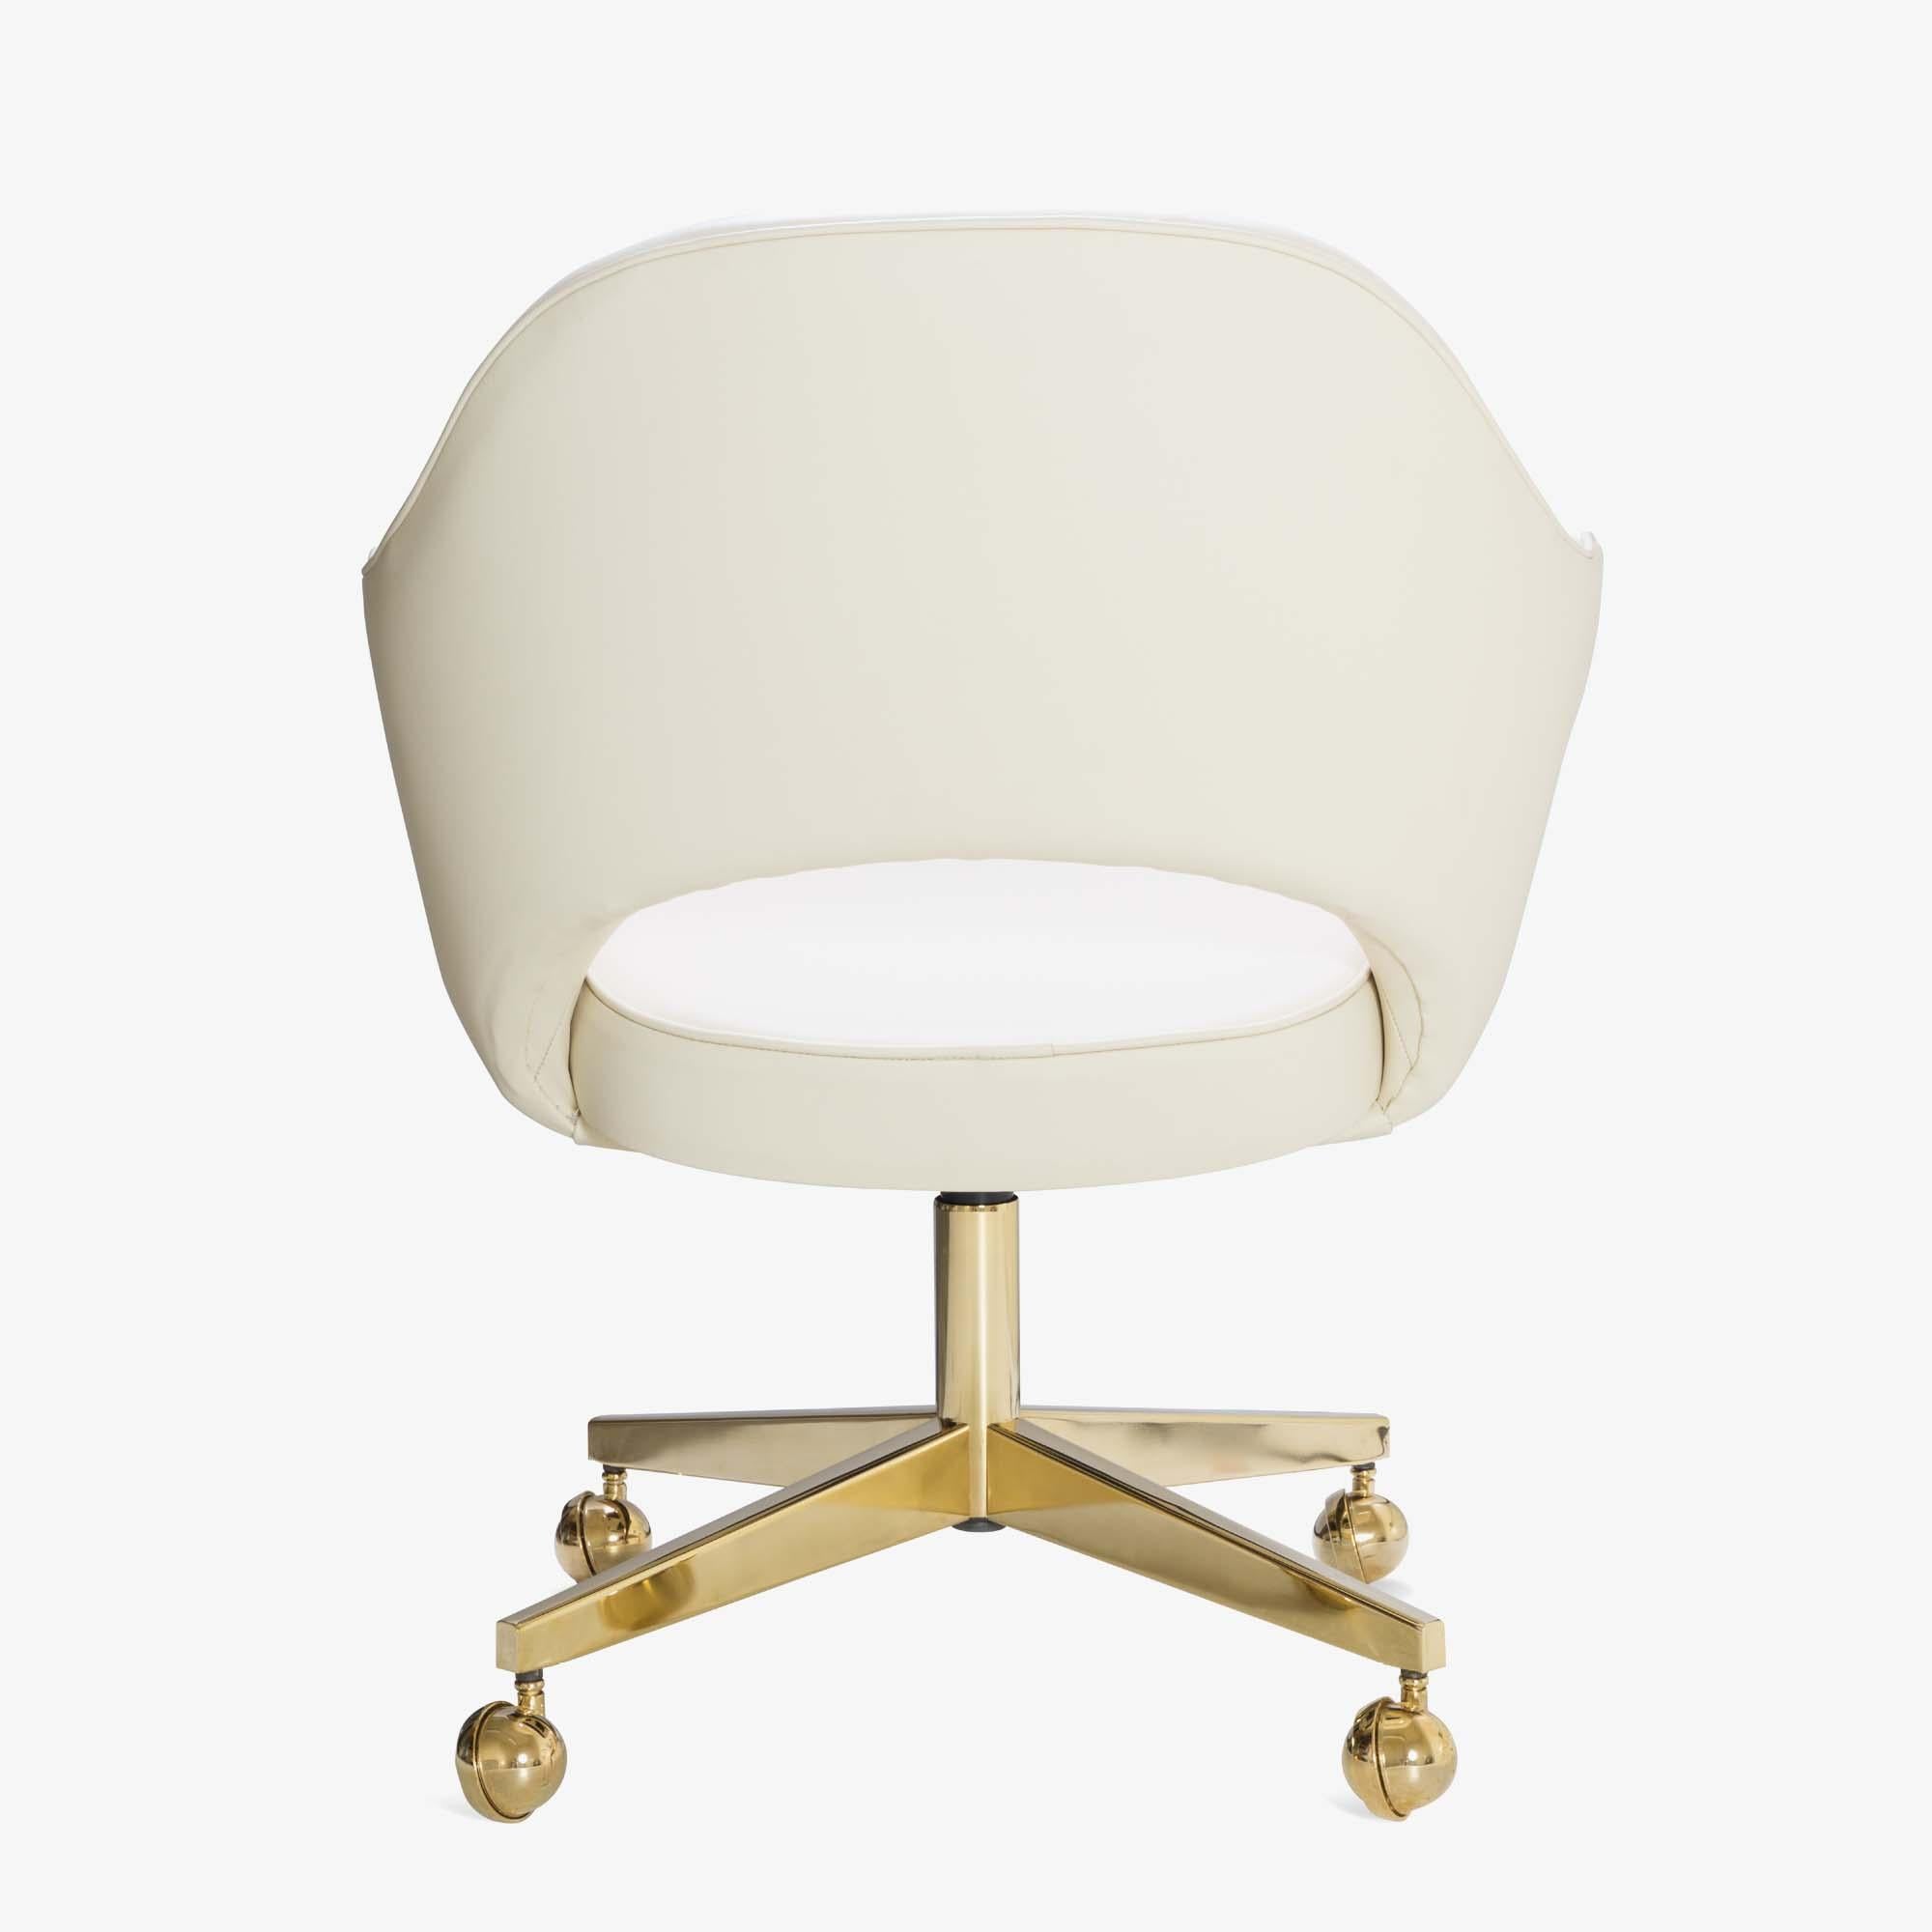 Plated Saarinen Executive Armchair in Creme Leather on Swivel Base, Gold Edition